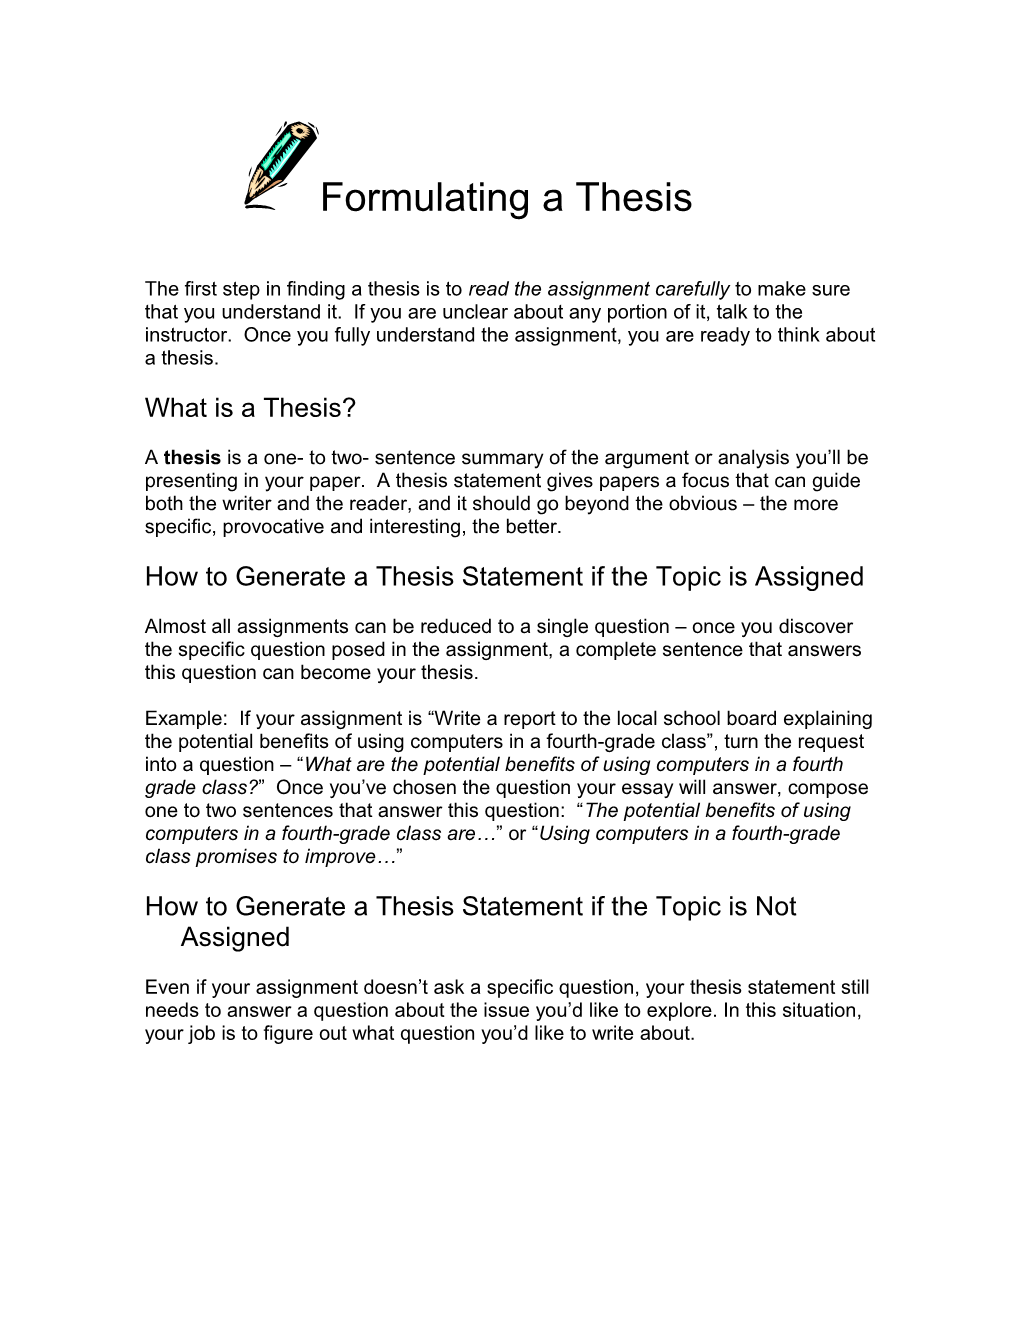 How to Generate a Thesis Statement If the Topic Is Assigned